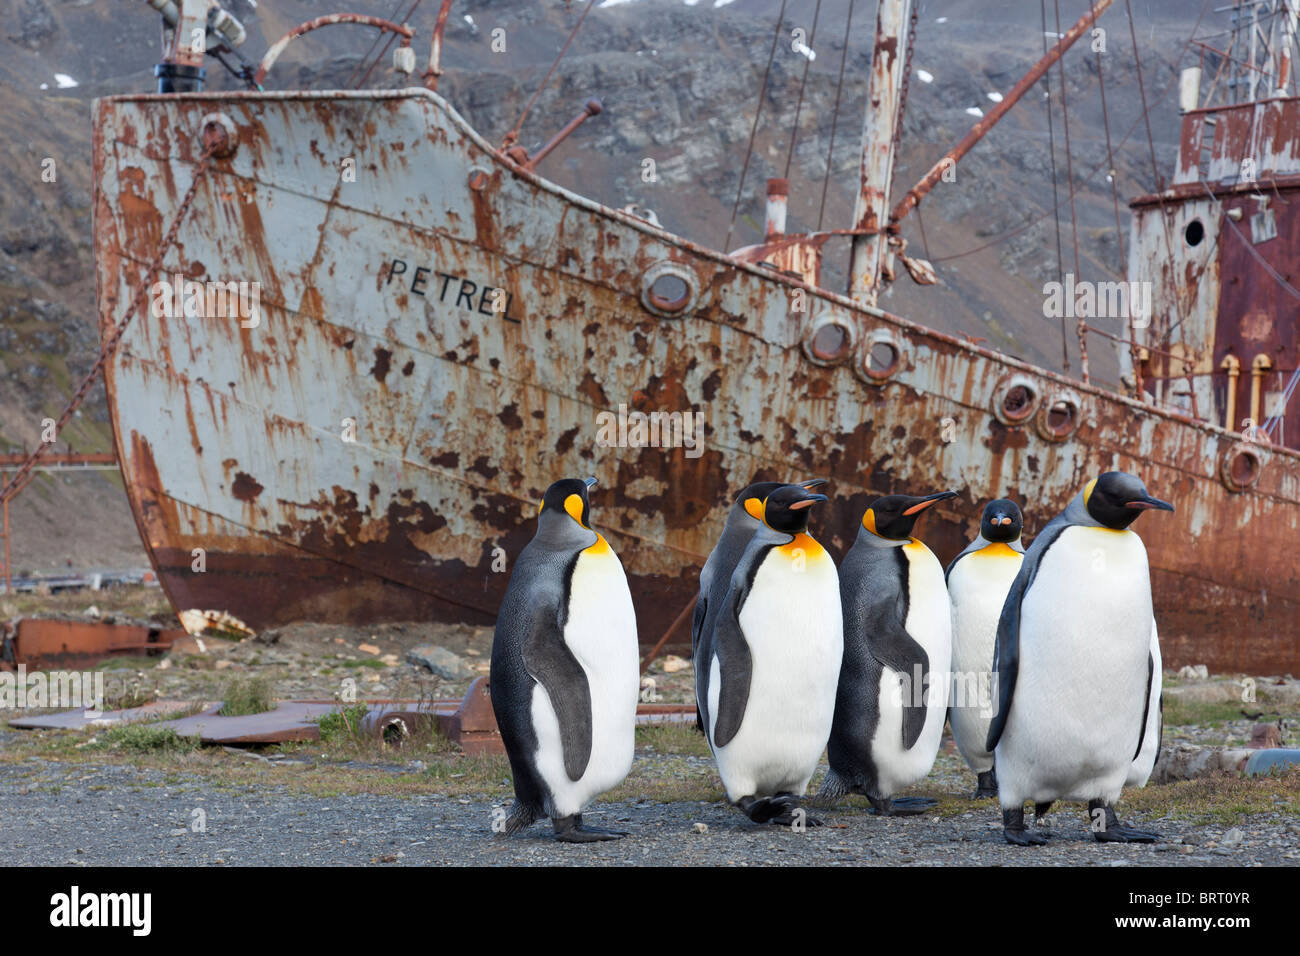 King penguins and relic ships at the old whaling station of Grytviken, South Georgia Island Stock Photo